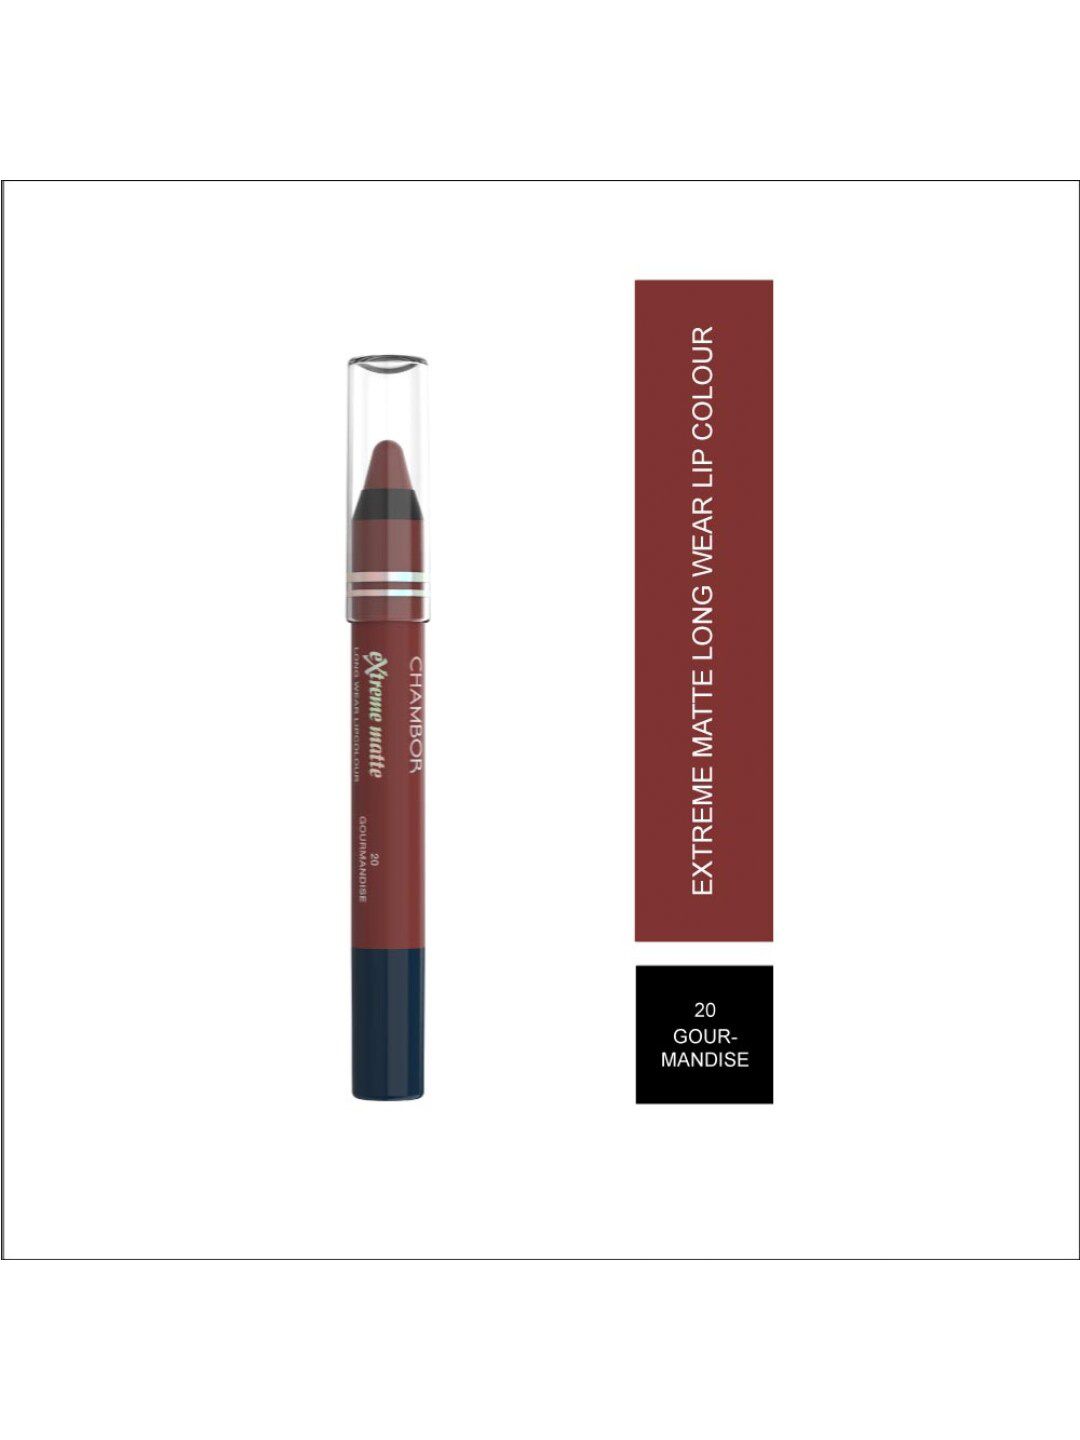 Chambor Extreme Matte Long Wear Lip Colour 2.8 g - Gourmandise 20 Price in India